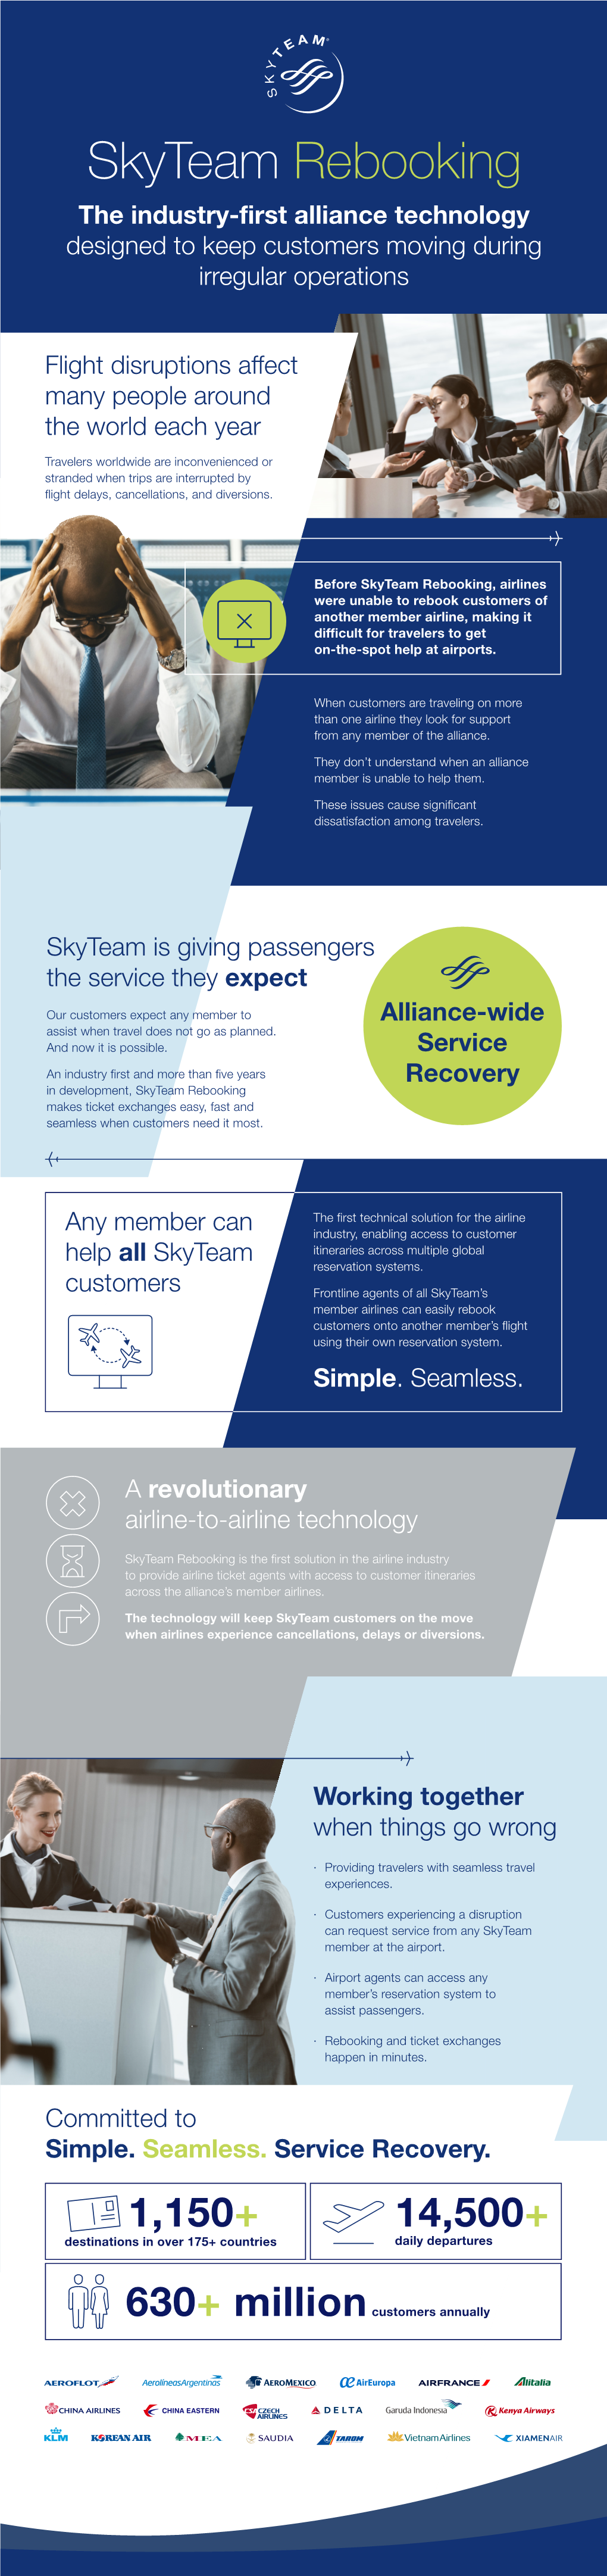 Skyteam Rebooking the Industry-First Alliance Technology Designed to Keep Customers Moving During Irregular Operations